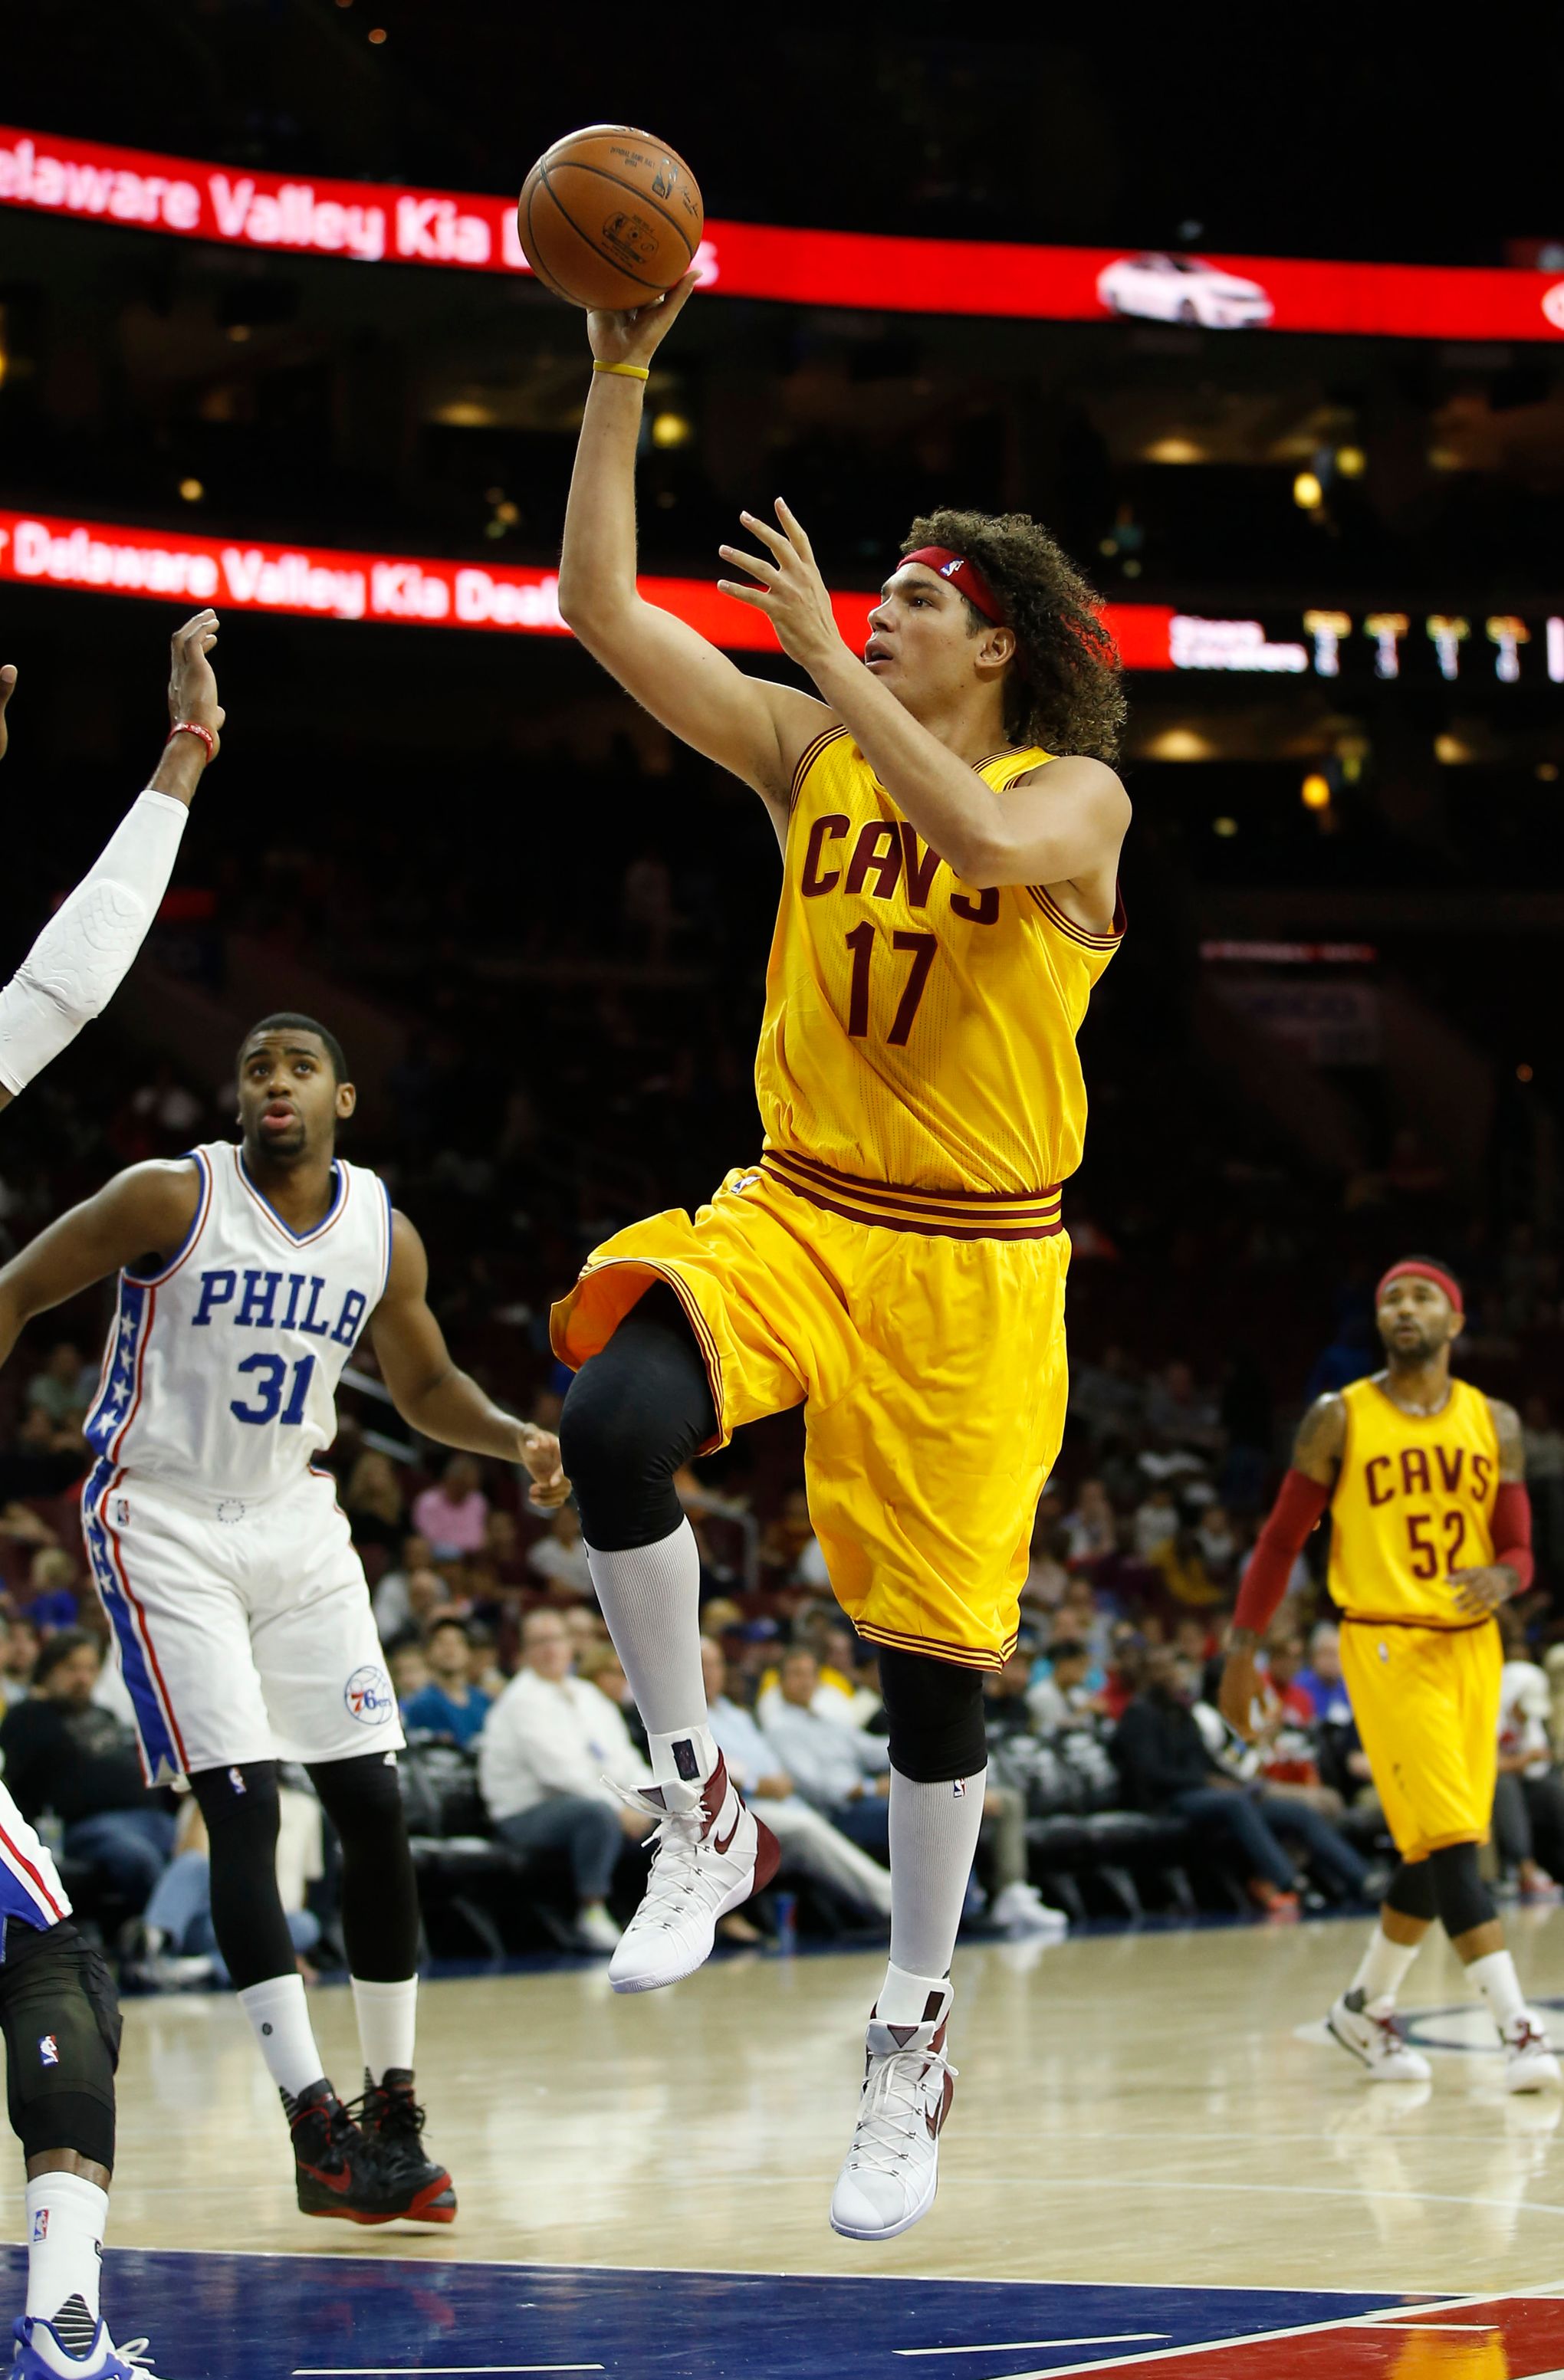 Anderson Varejao returns to Cleveland Cavaliers on 10-day deal